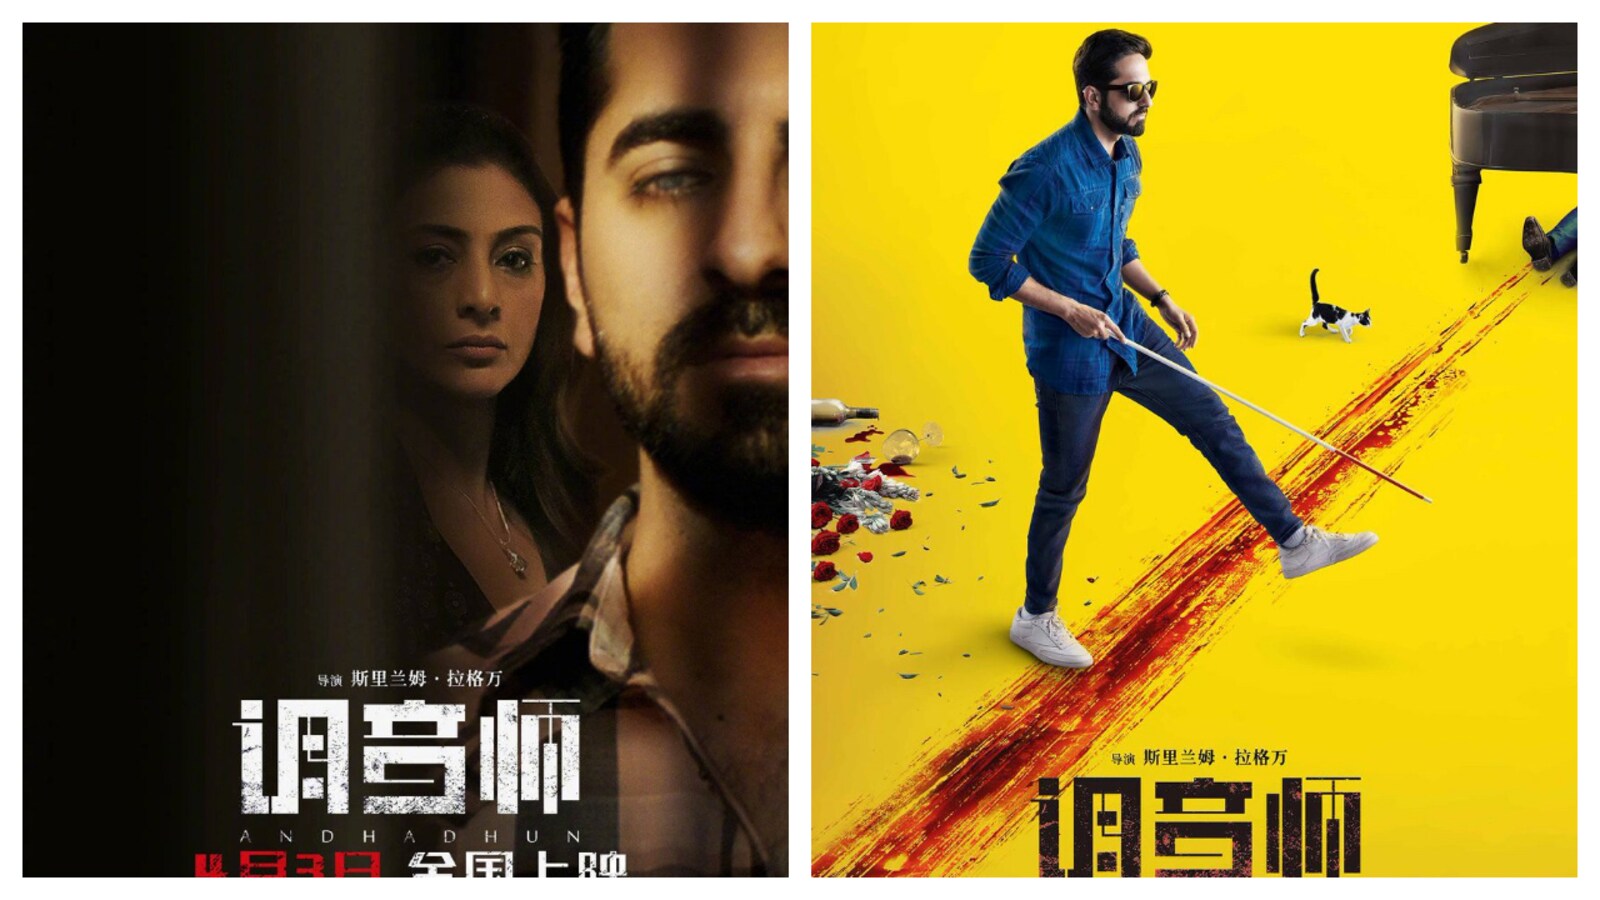 Bollywood's box office success in China is not restricted to Andhadhun